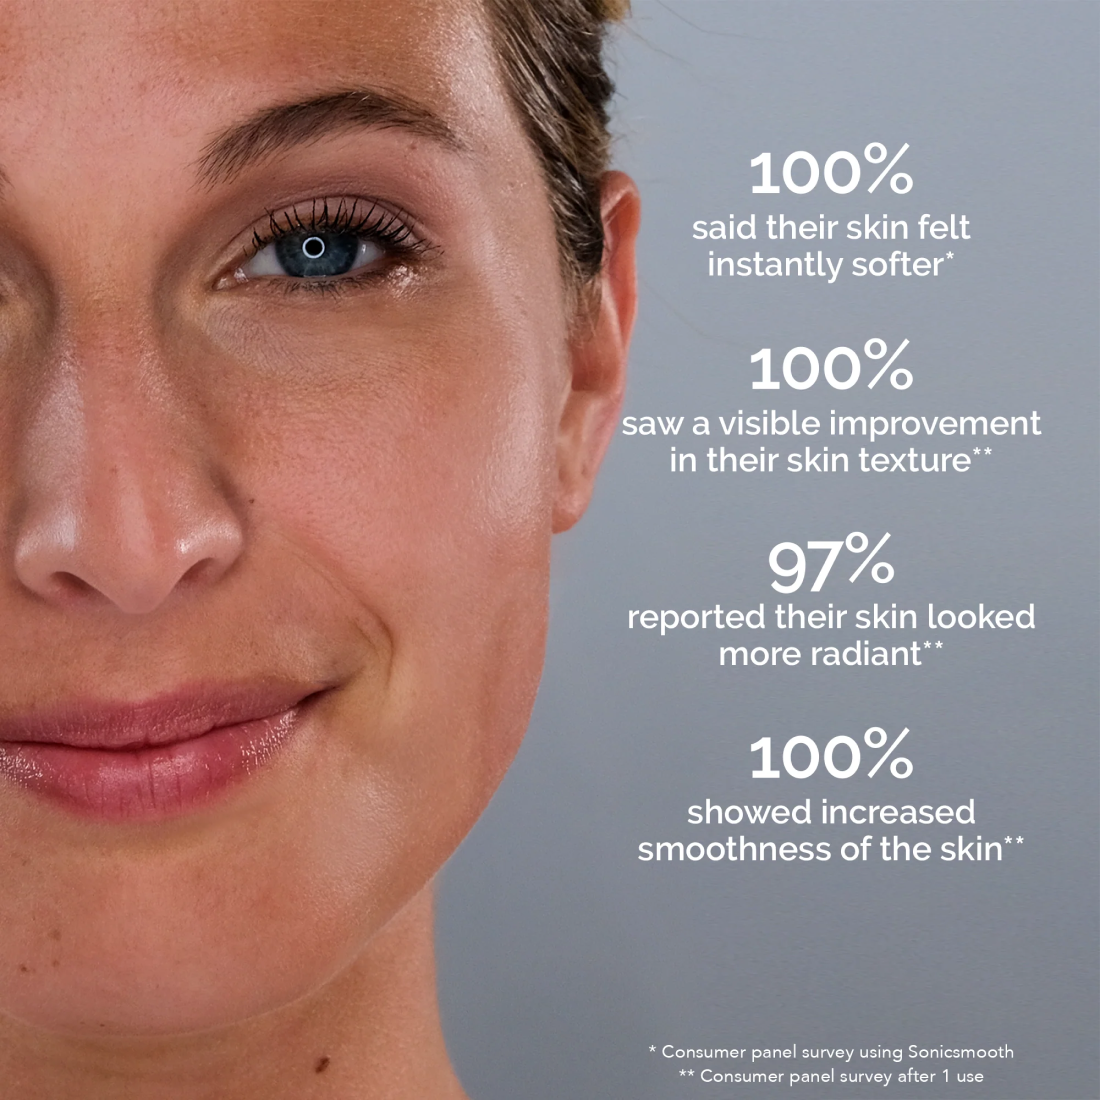 Pink . Close-up of a woman with clear blue eyes and flawless skin, using the Michael Todd Beauty 4 in 1 Dermaplaning & Post Treatment System, with text overlays about skin improvement percentages from a survey.